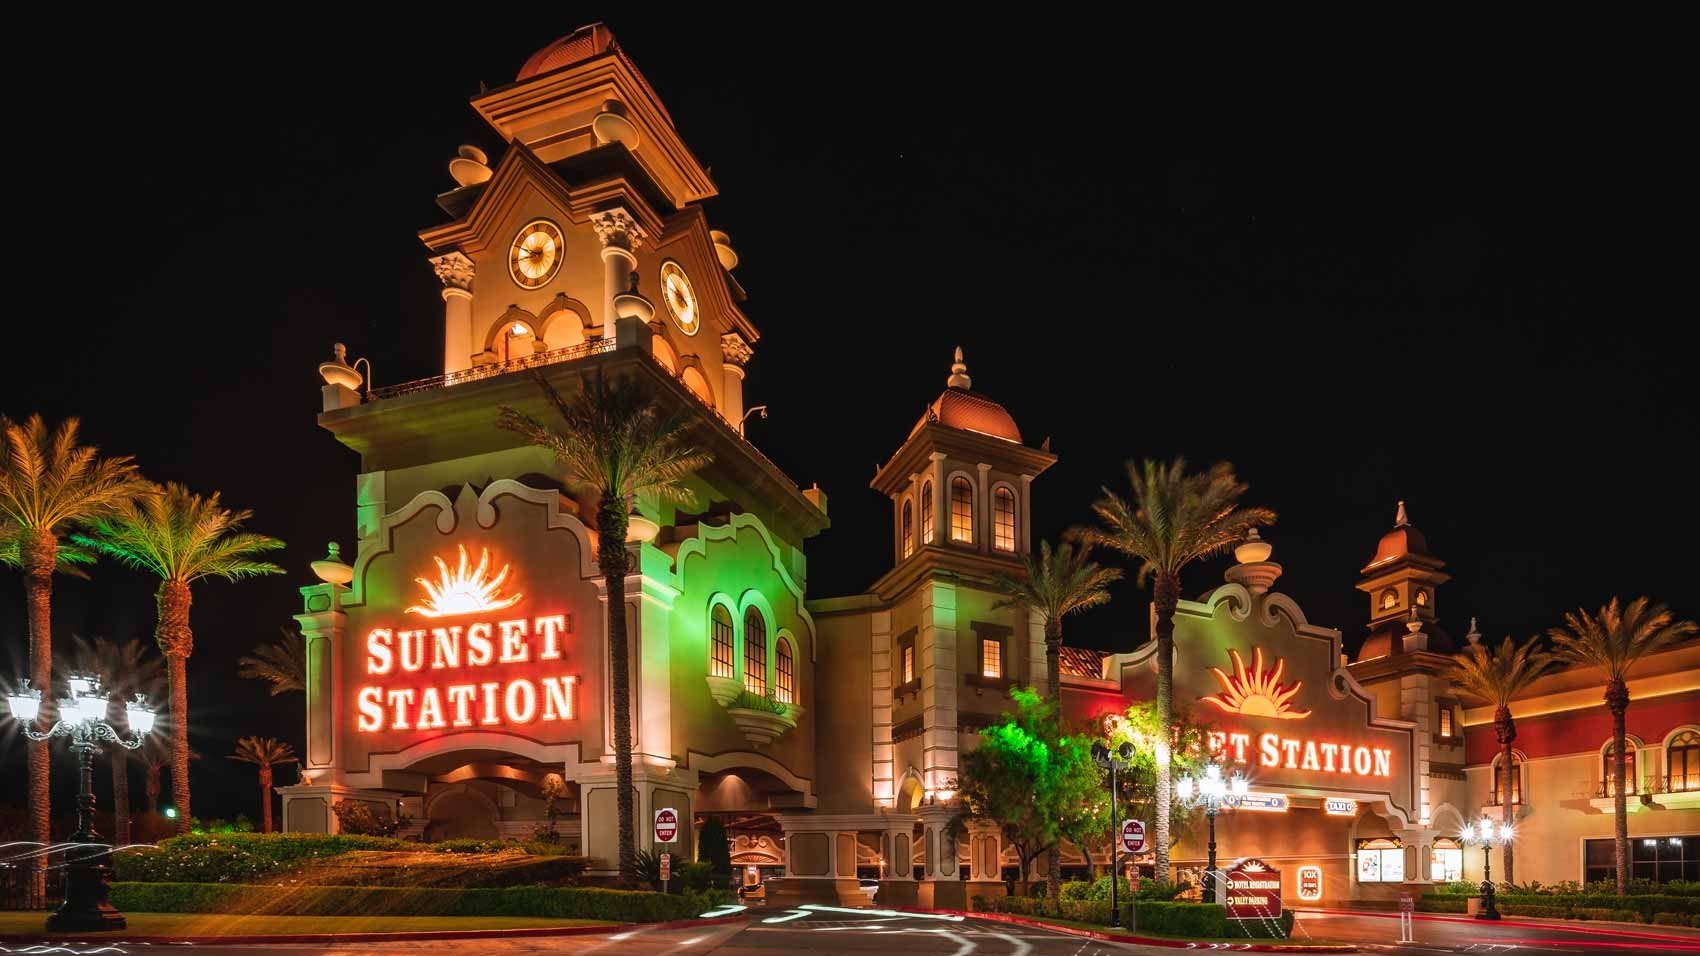 Nevada: Sunset Station employees vote to decertify Culinary Union, casino withdraws recognition